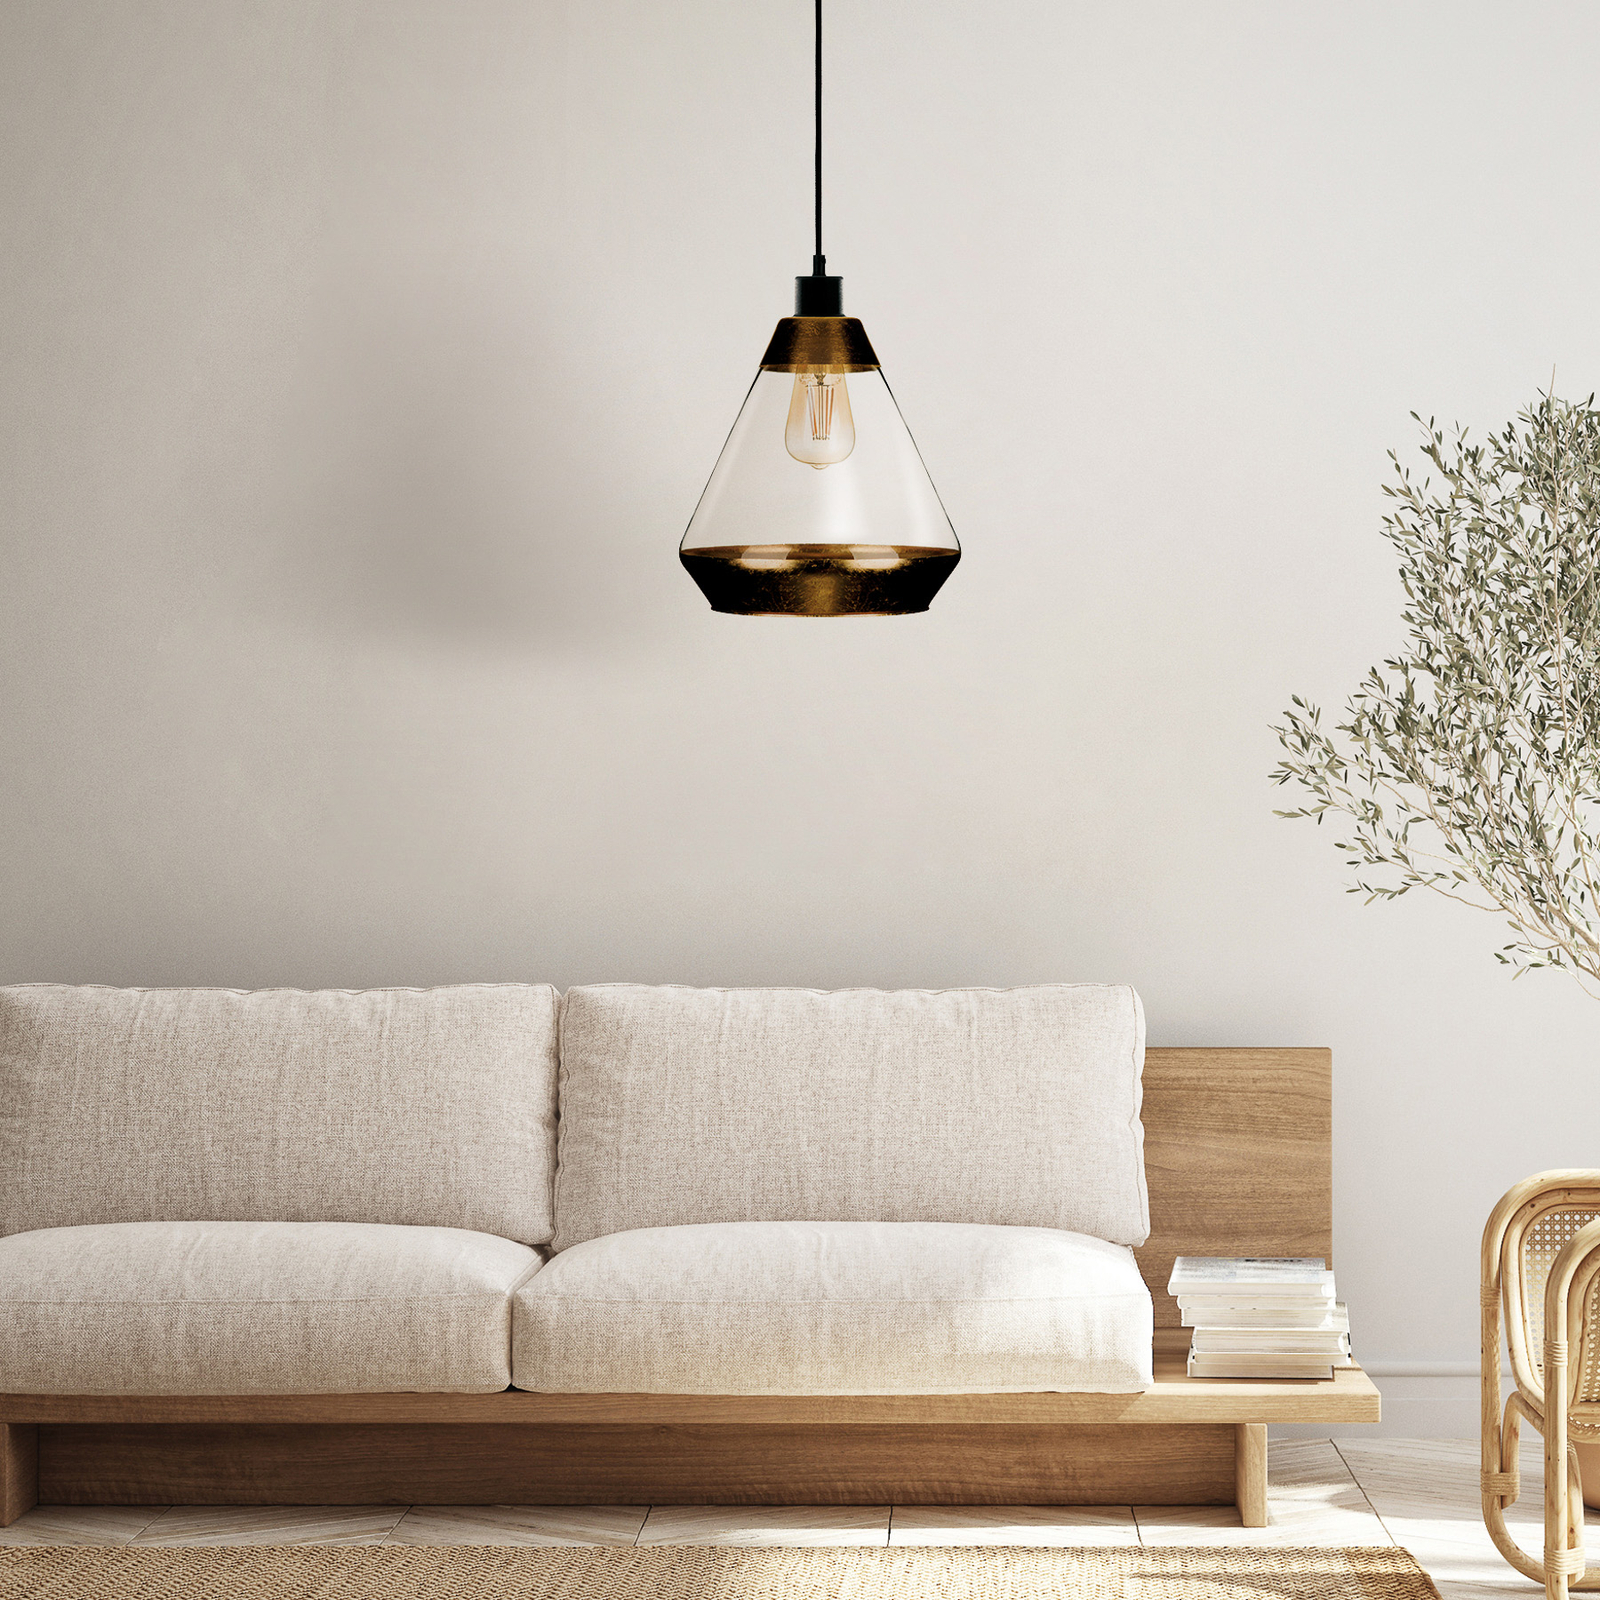 Lonceng pendant light made of glass, gold decor